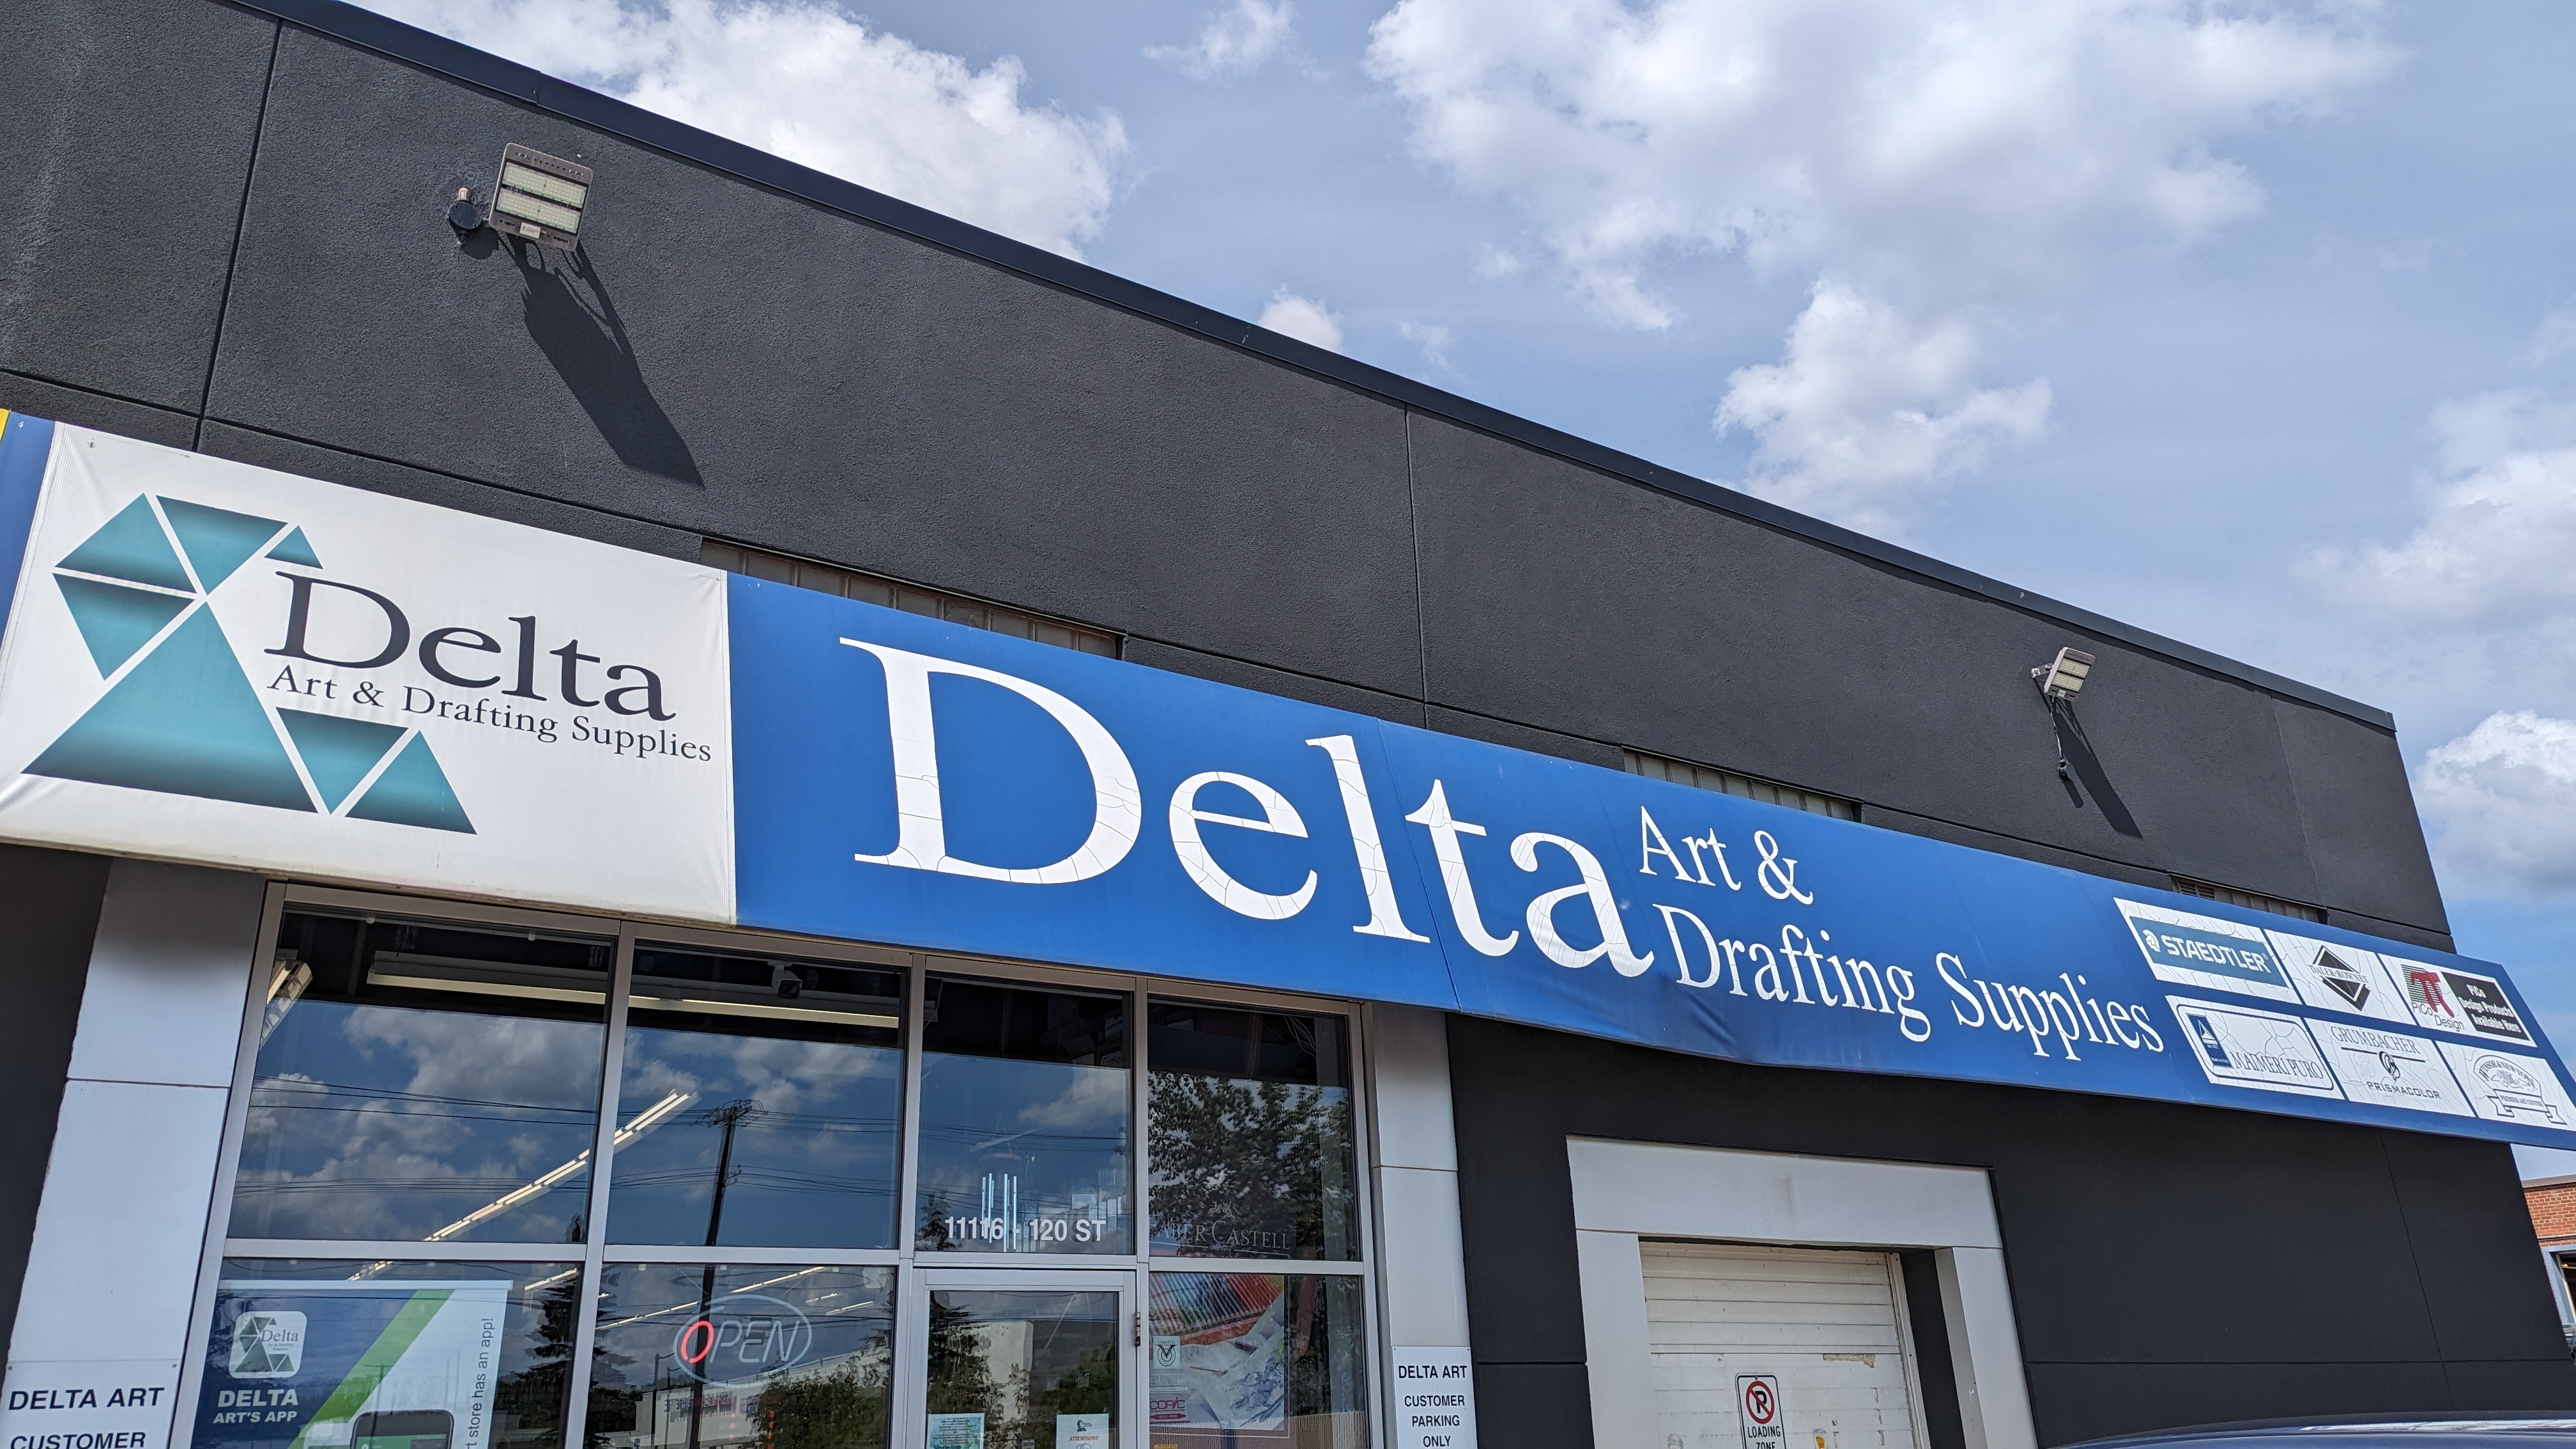 Delta Art and Drafting Supplies Storefront